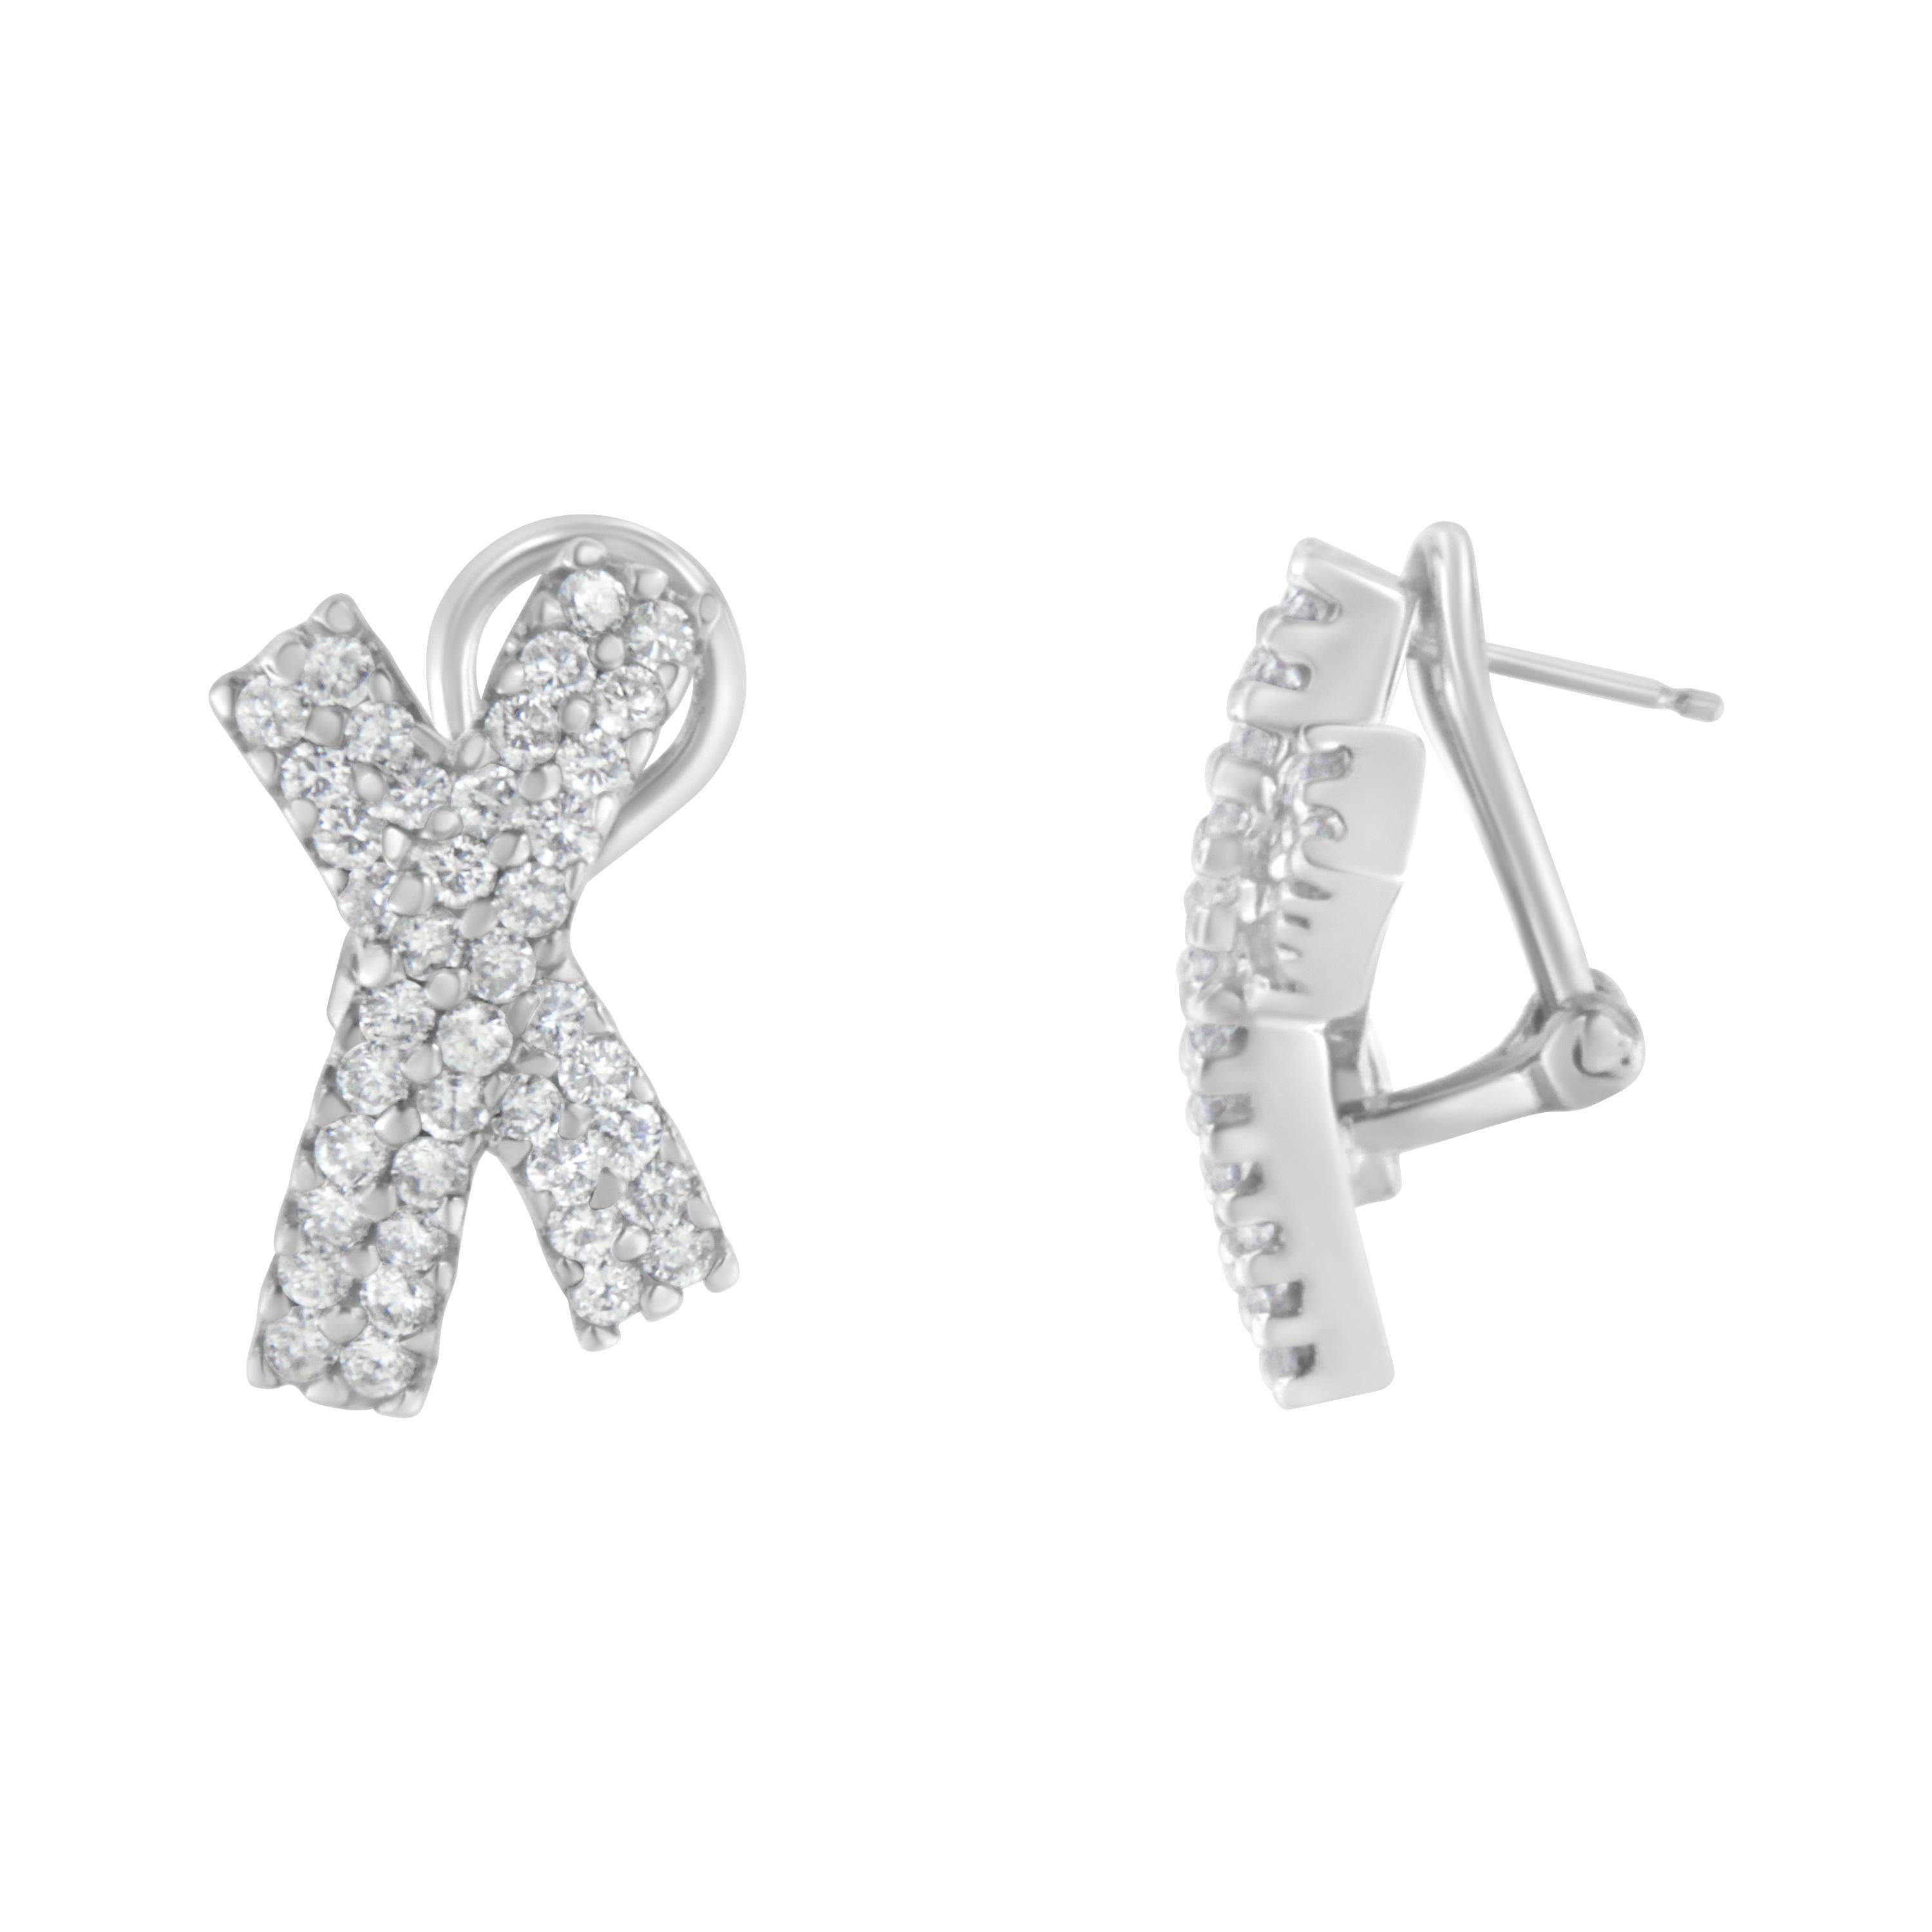 These shimmering dangle stud earrings are crafted in cool 14k white gold. Overlapping bands highlighted with two rows of round cut diamonds create an 